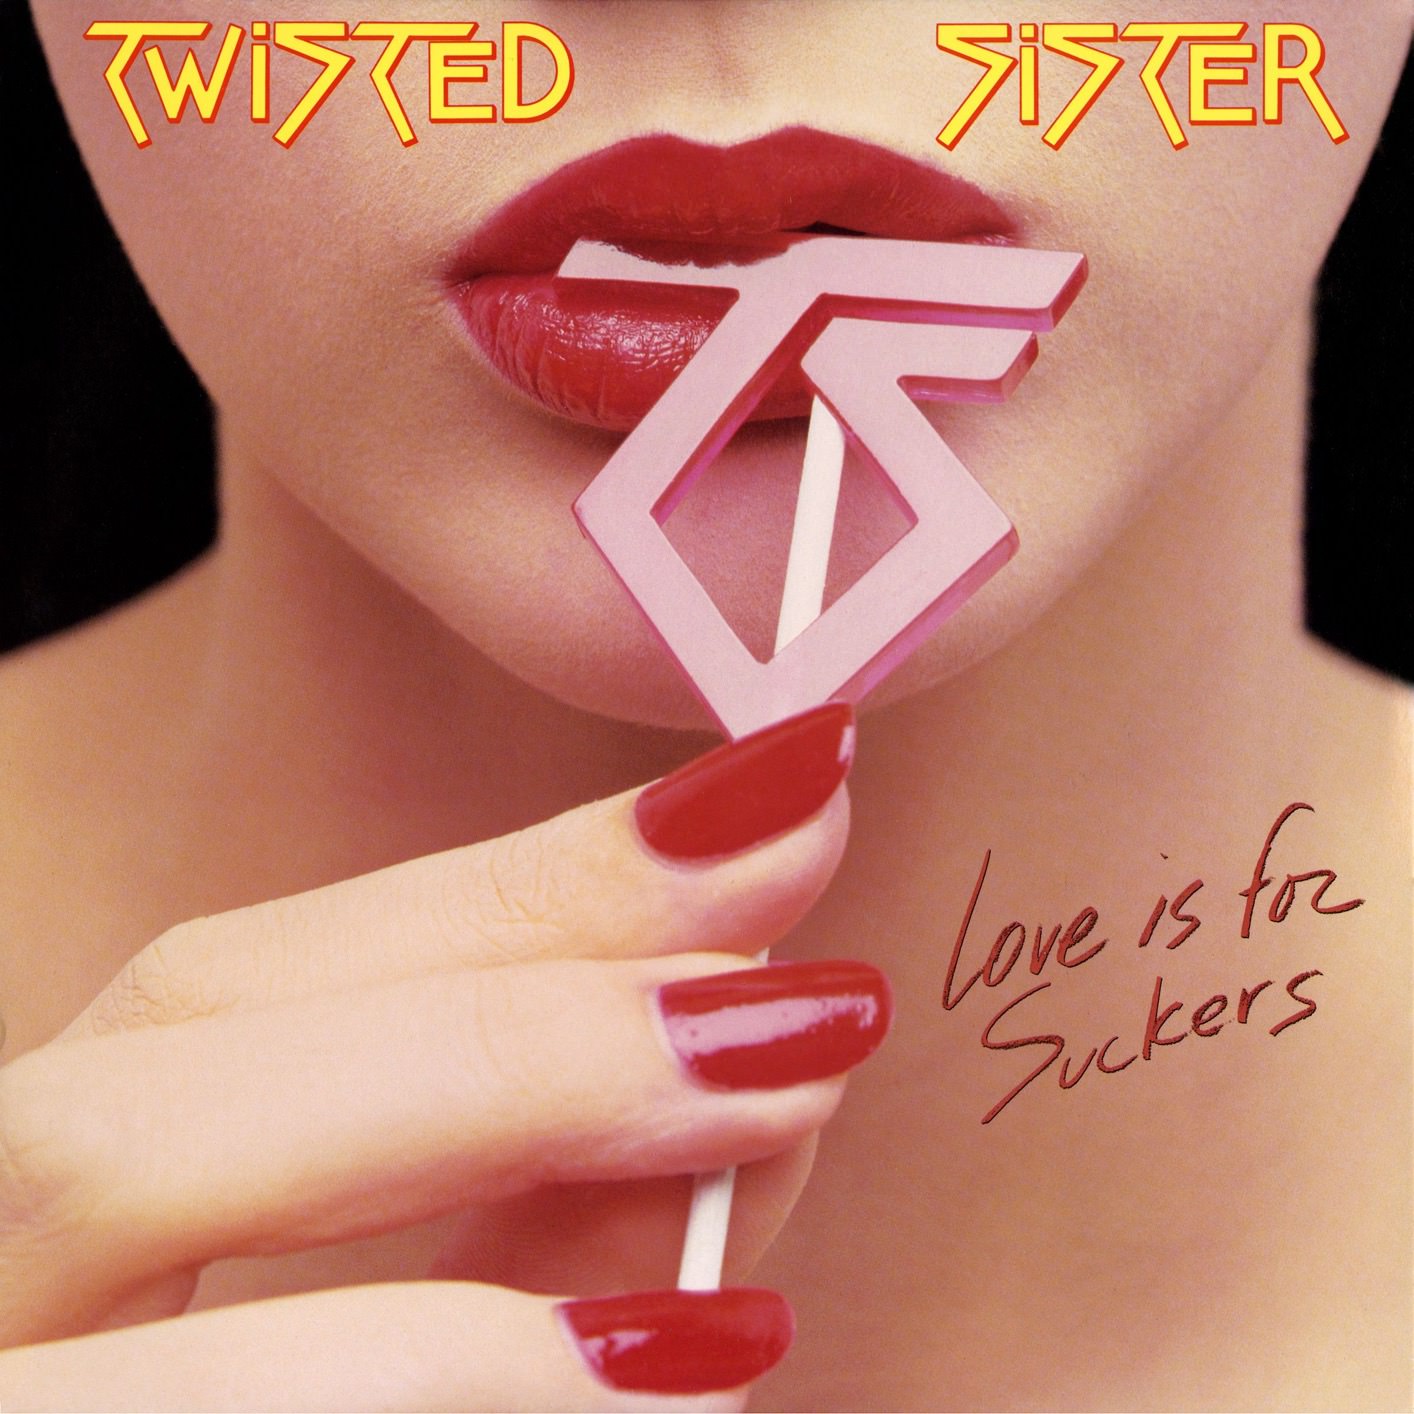 Twisted Sister - Love Is For Suckers (1987/2017) [Qobuz FLAC 24bit/96kHz]